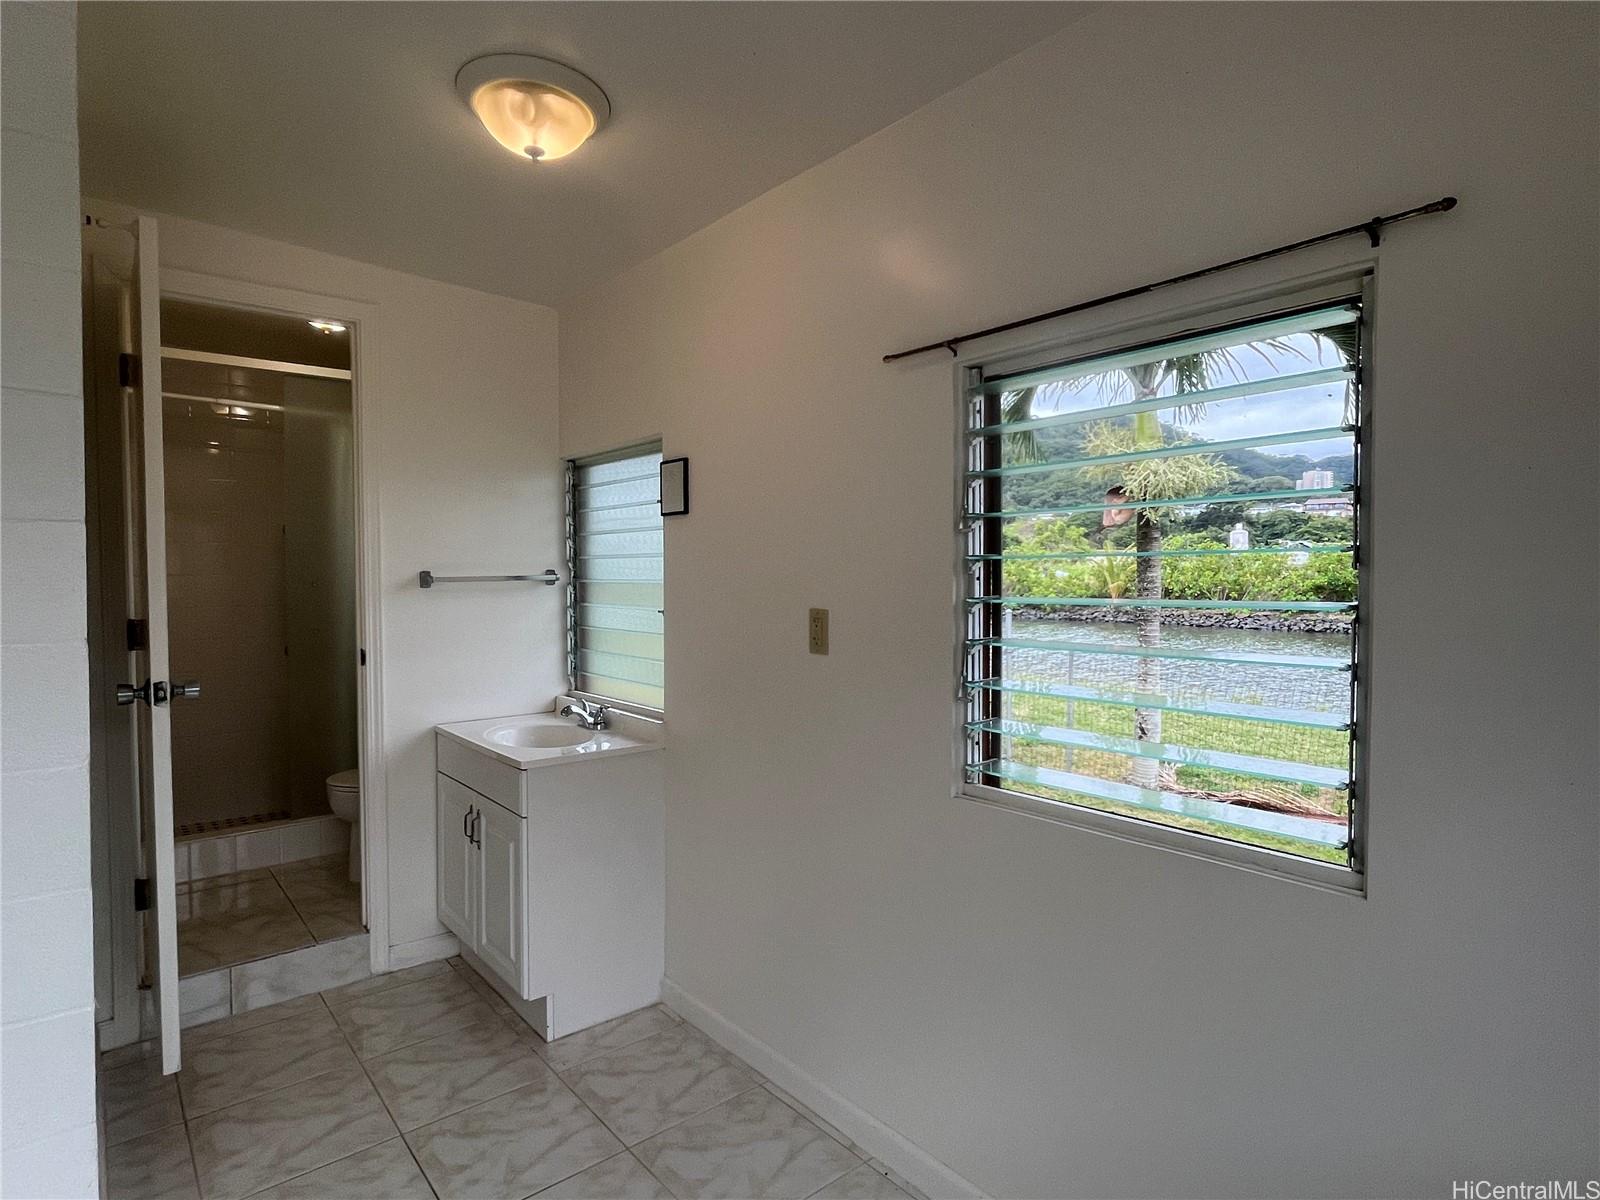 45-12 Oopuhue Place Kaneohe - Rental - photo 12 of 15